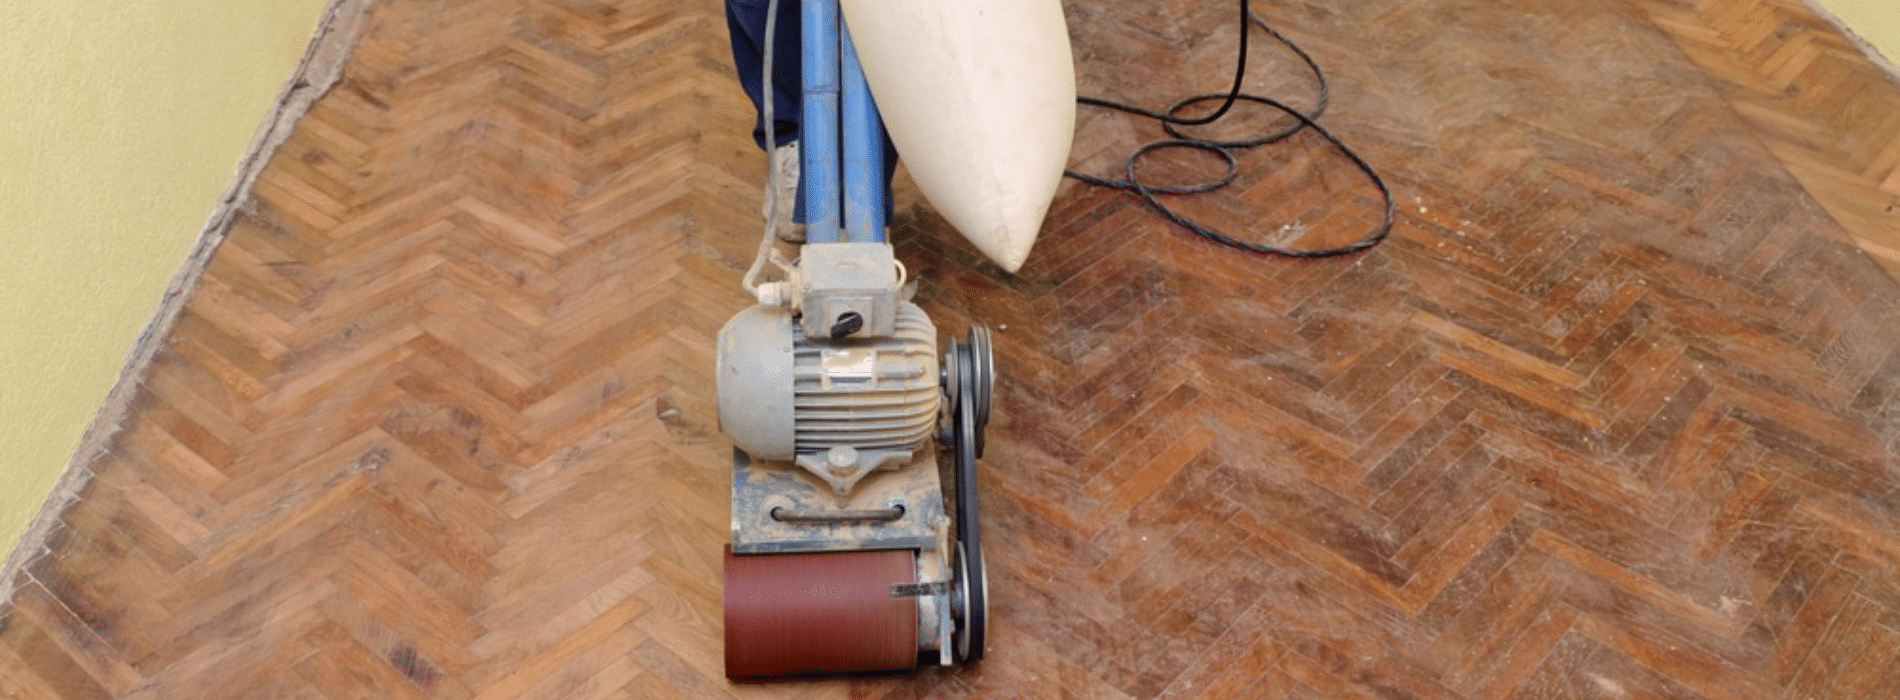 In Archway, N19, Mr Sander® are using a Bona Scorpion drum sander (200 mm, 1.5 kW, 240 V, 50 Hz) connected to a dust extraction system with a HEPA filter for sanding a herringbone floor. This ensures a clean and efficient result, providing high-quality floor sanding services.